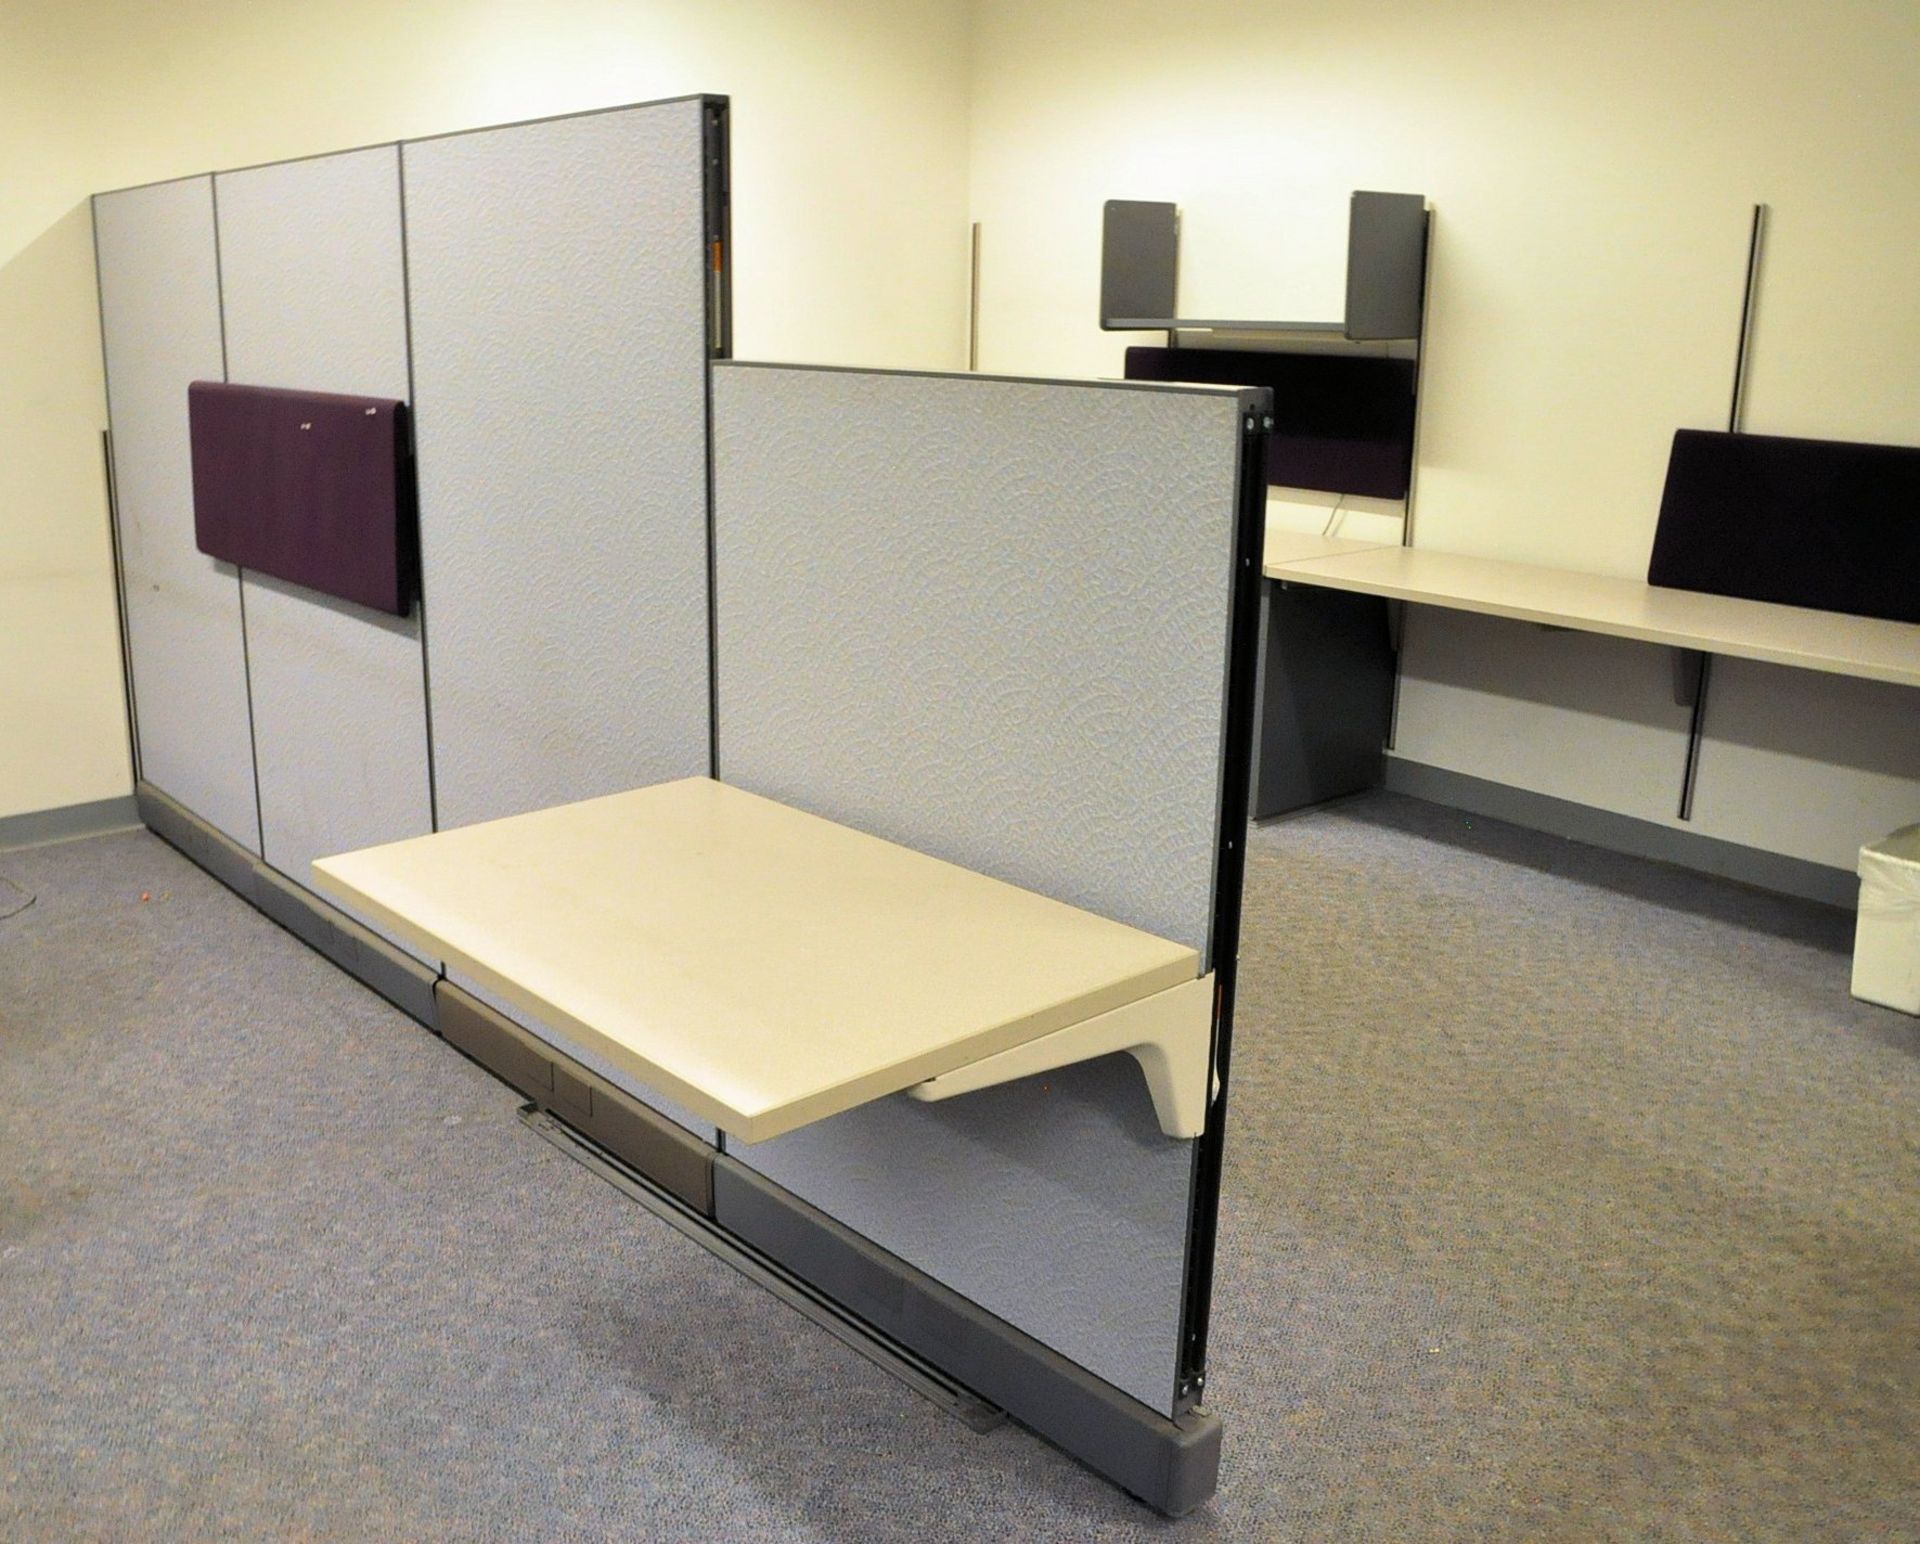 Lot-Cubical Partition Work Systems in (1) Group in (1) Office, - Image 3 of 7